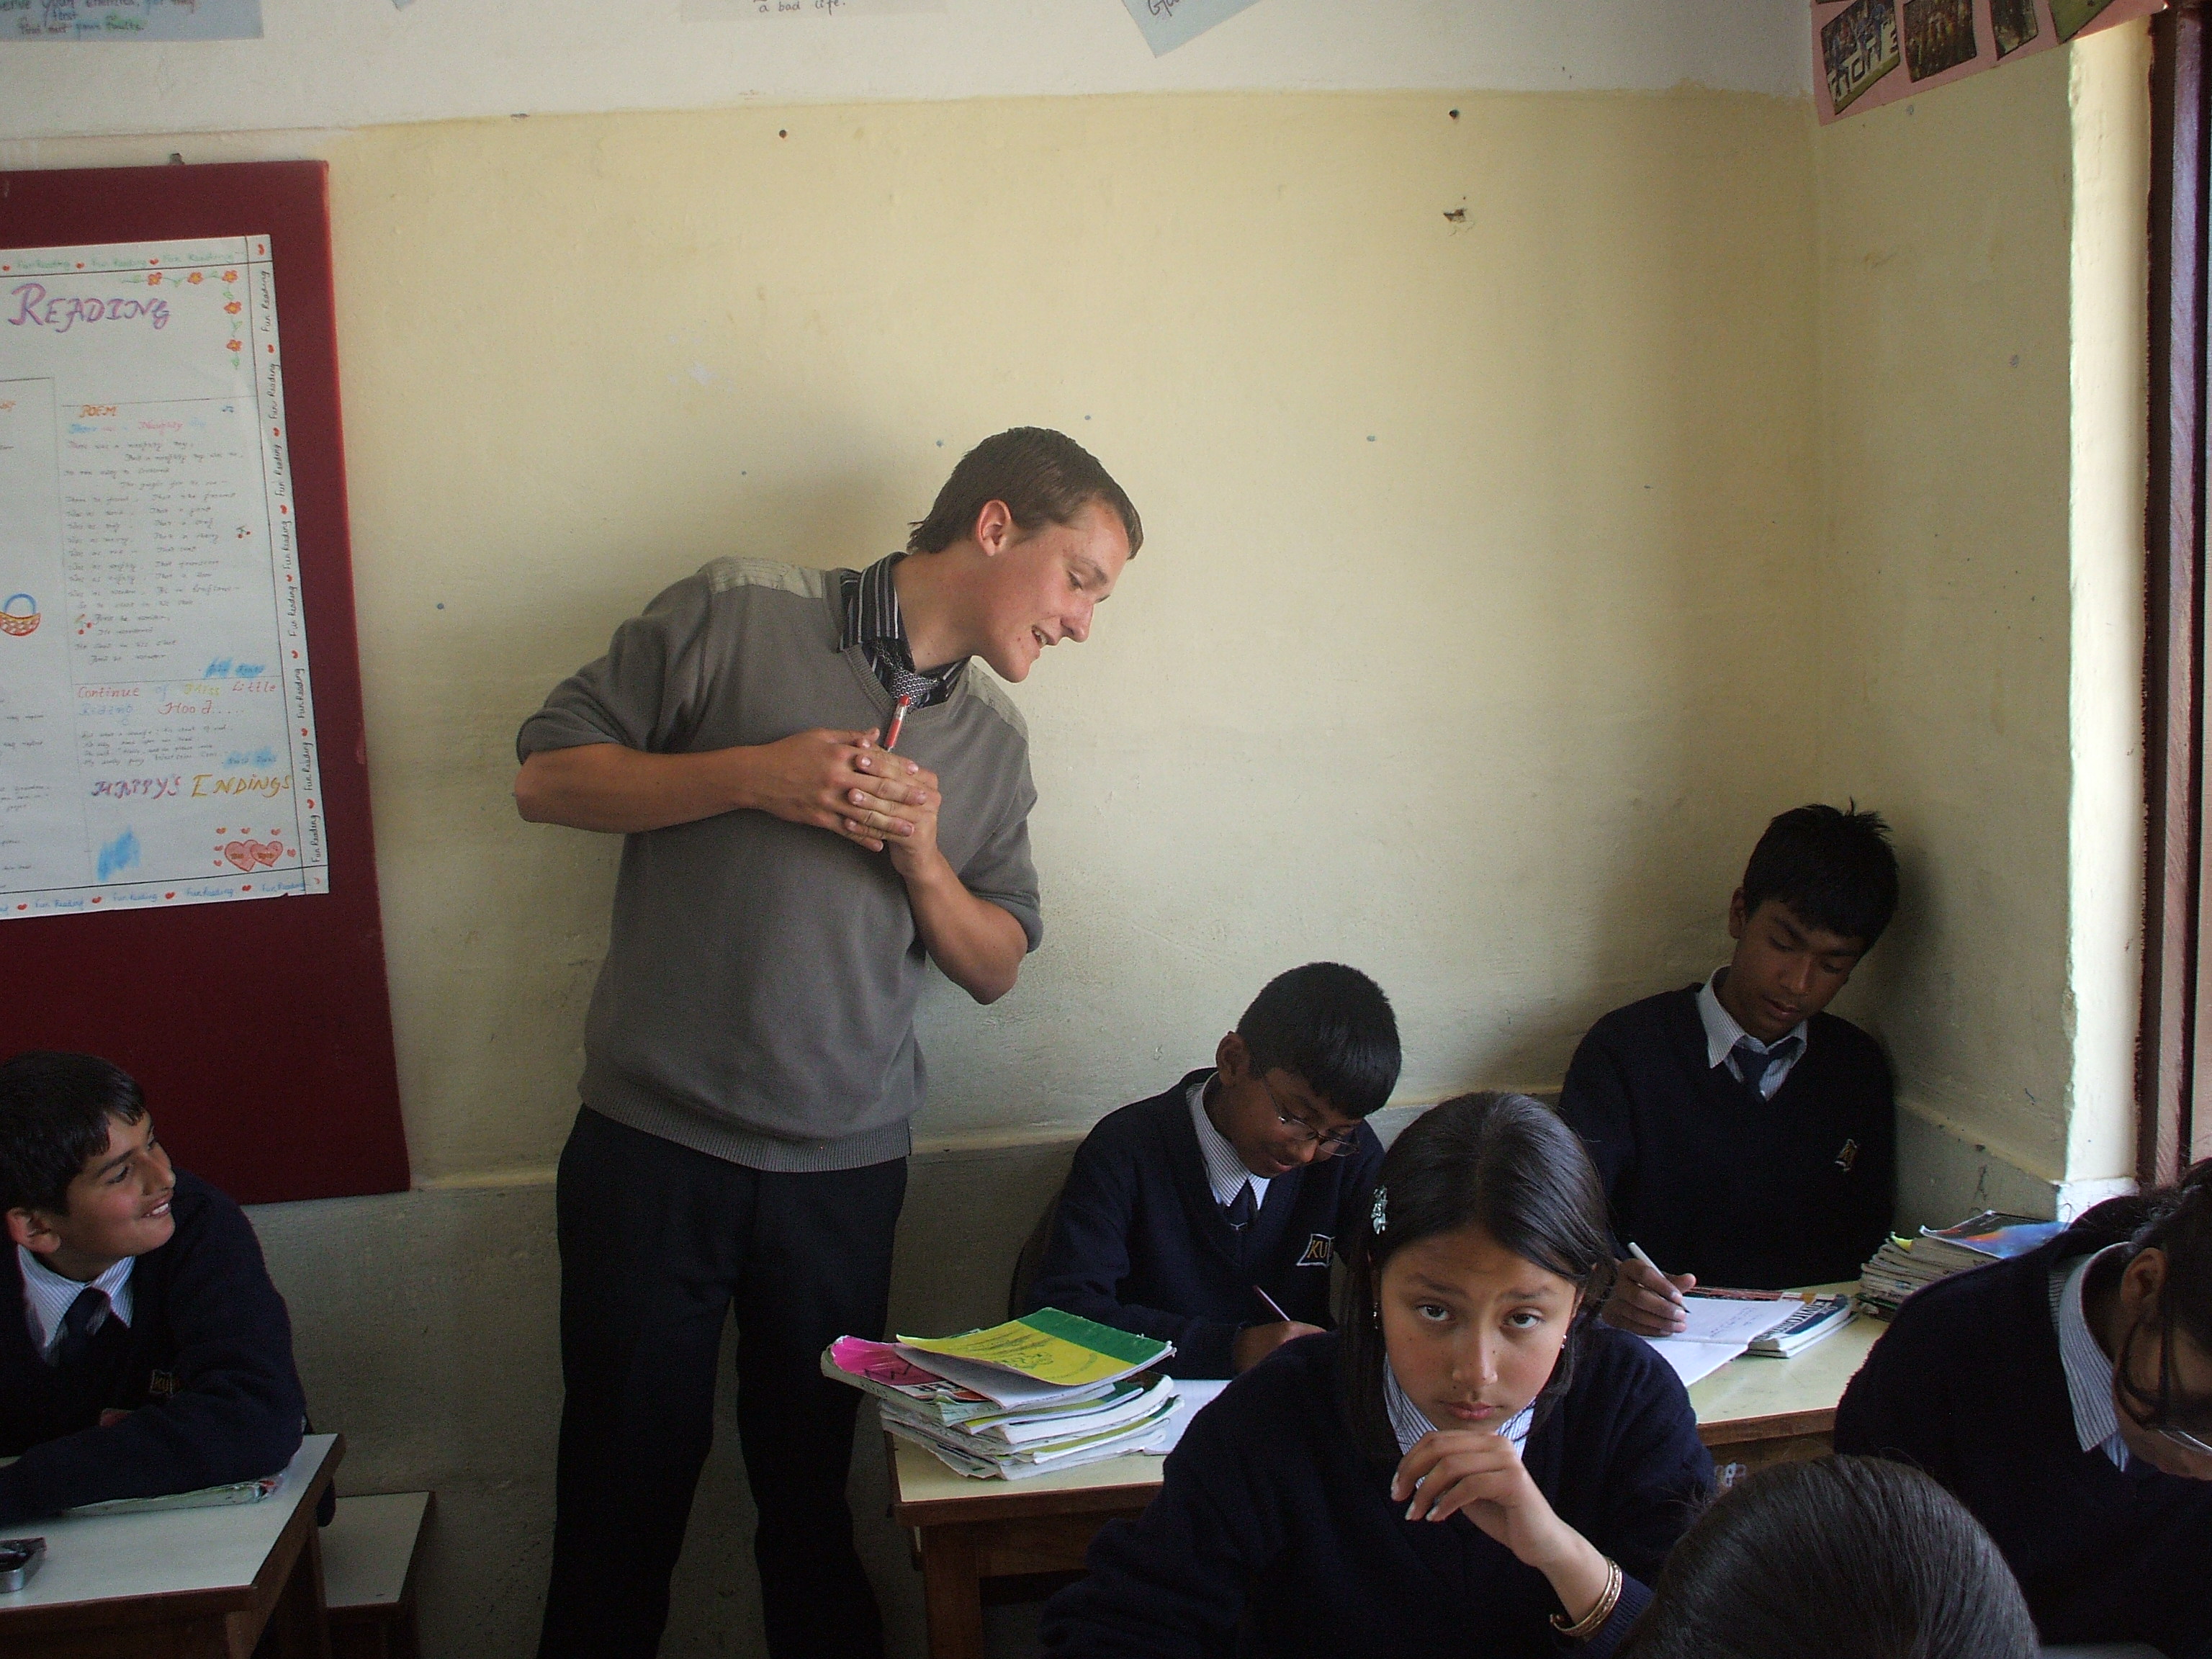 Where are they now? Sean McGann tells us how his life has changed since his time in Nepal